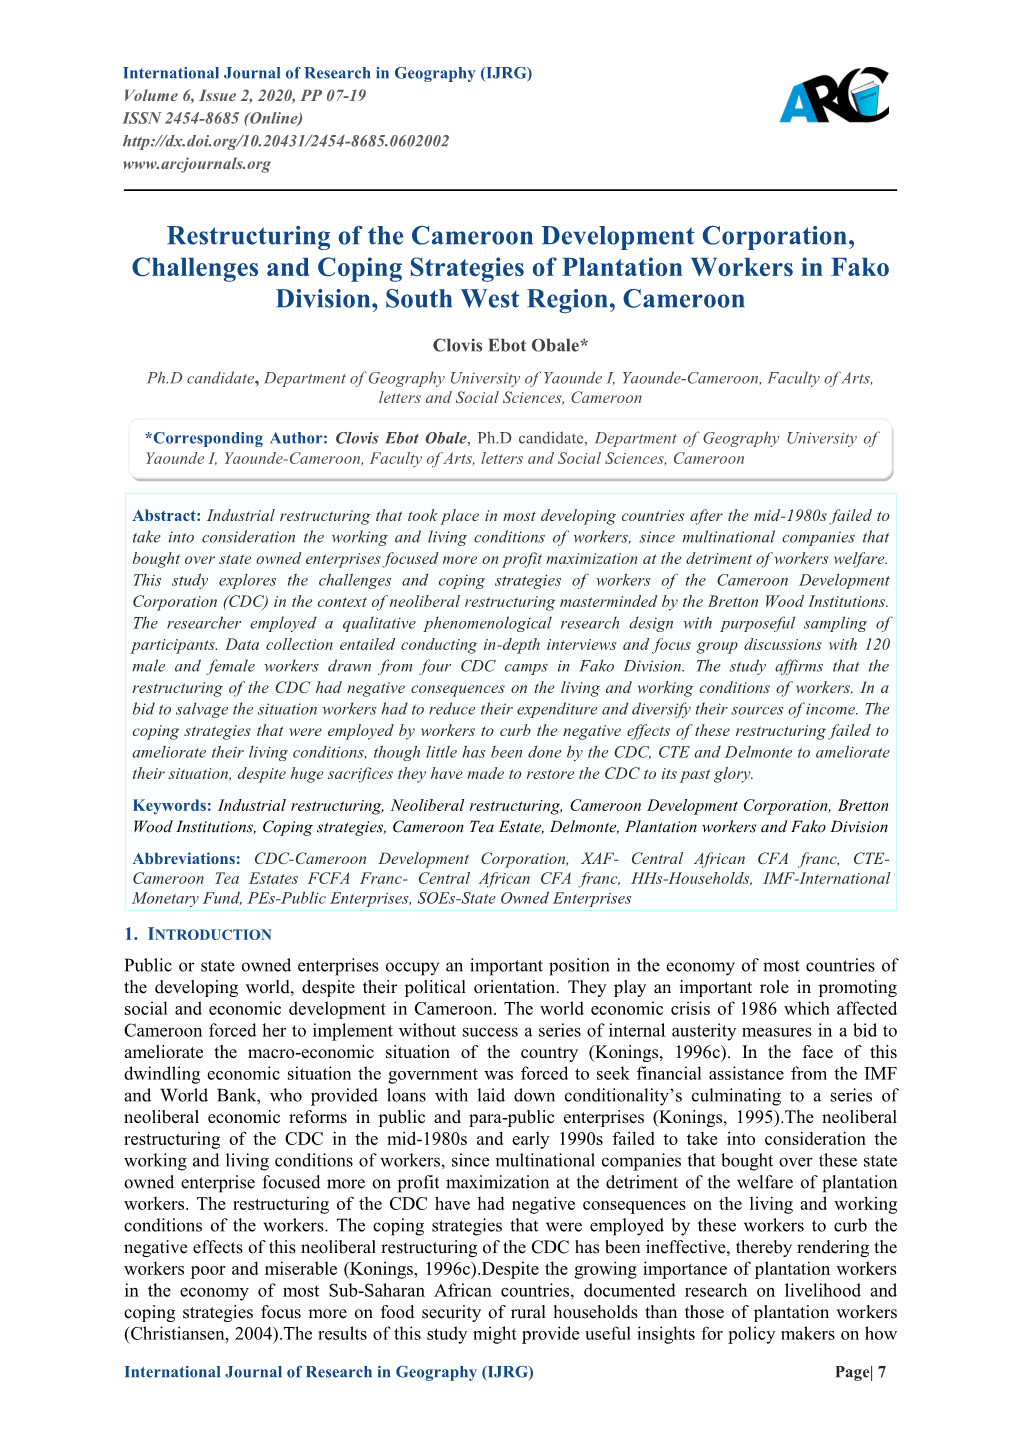 Restructuring of the Cameroon Development Corporation, Challenges and Coping Strategies of Plantation Workers in Fako Division, South West Region, Cameroon